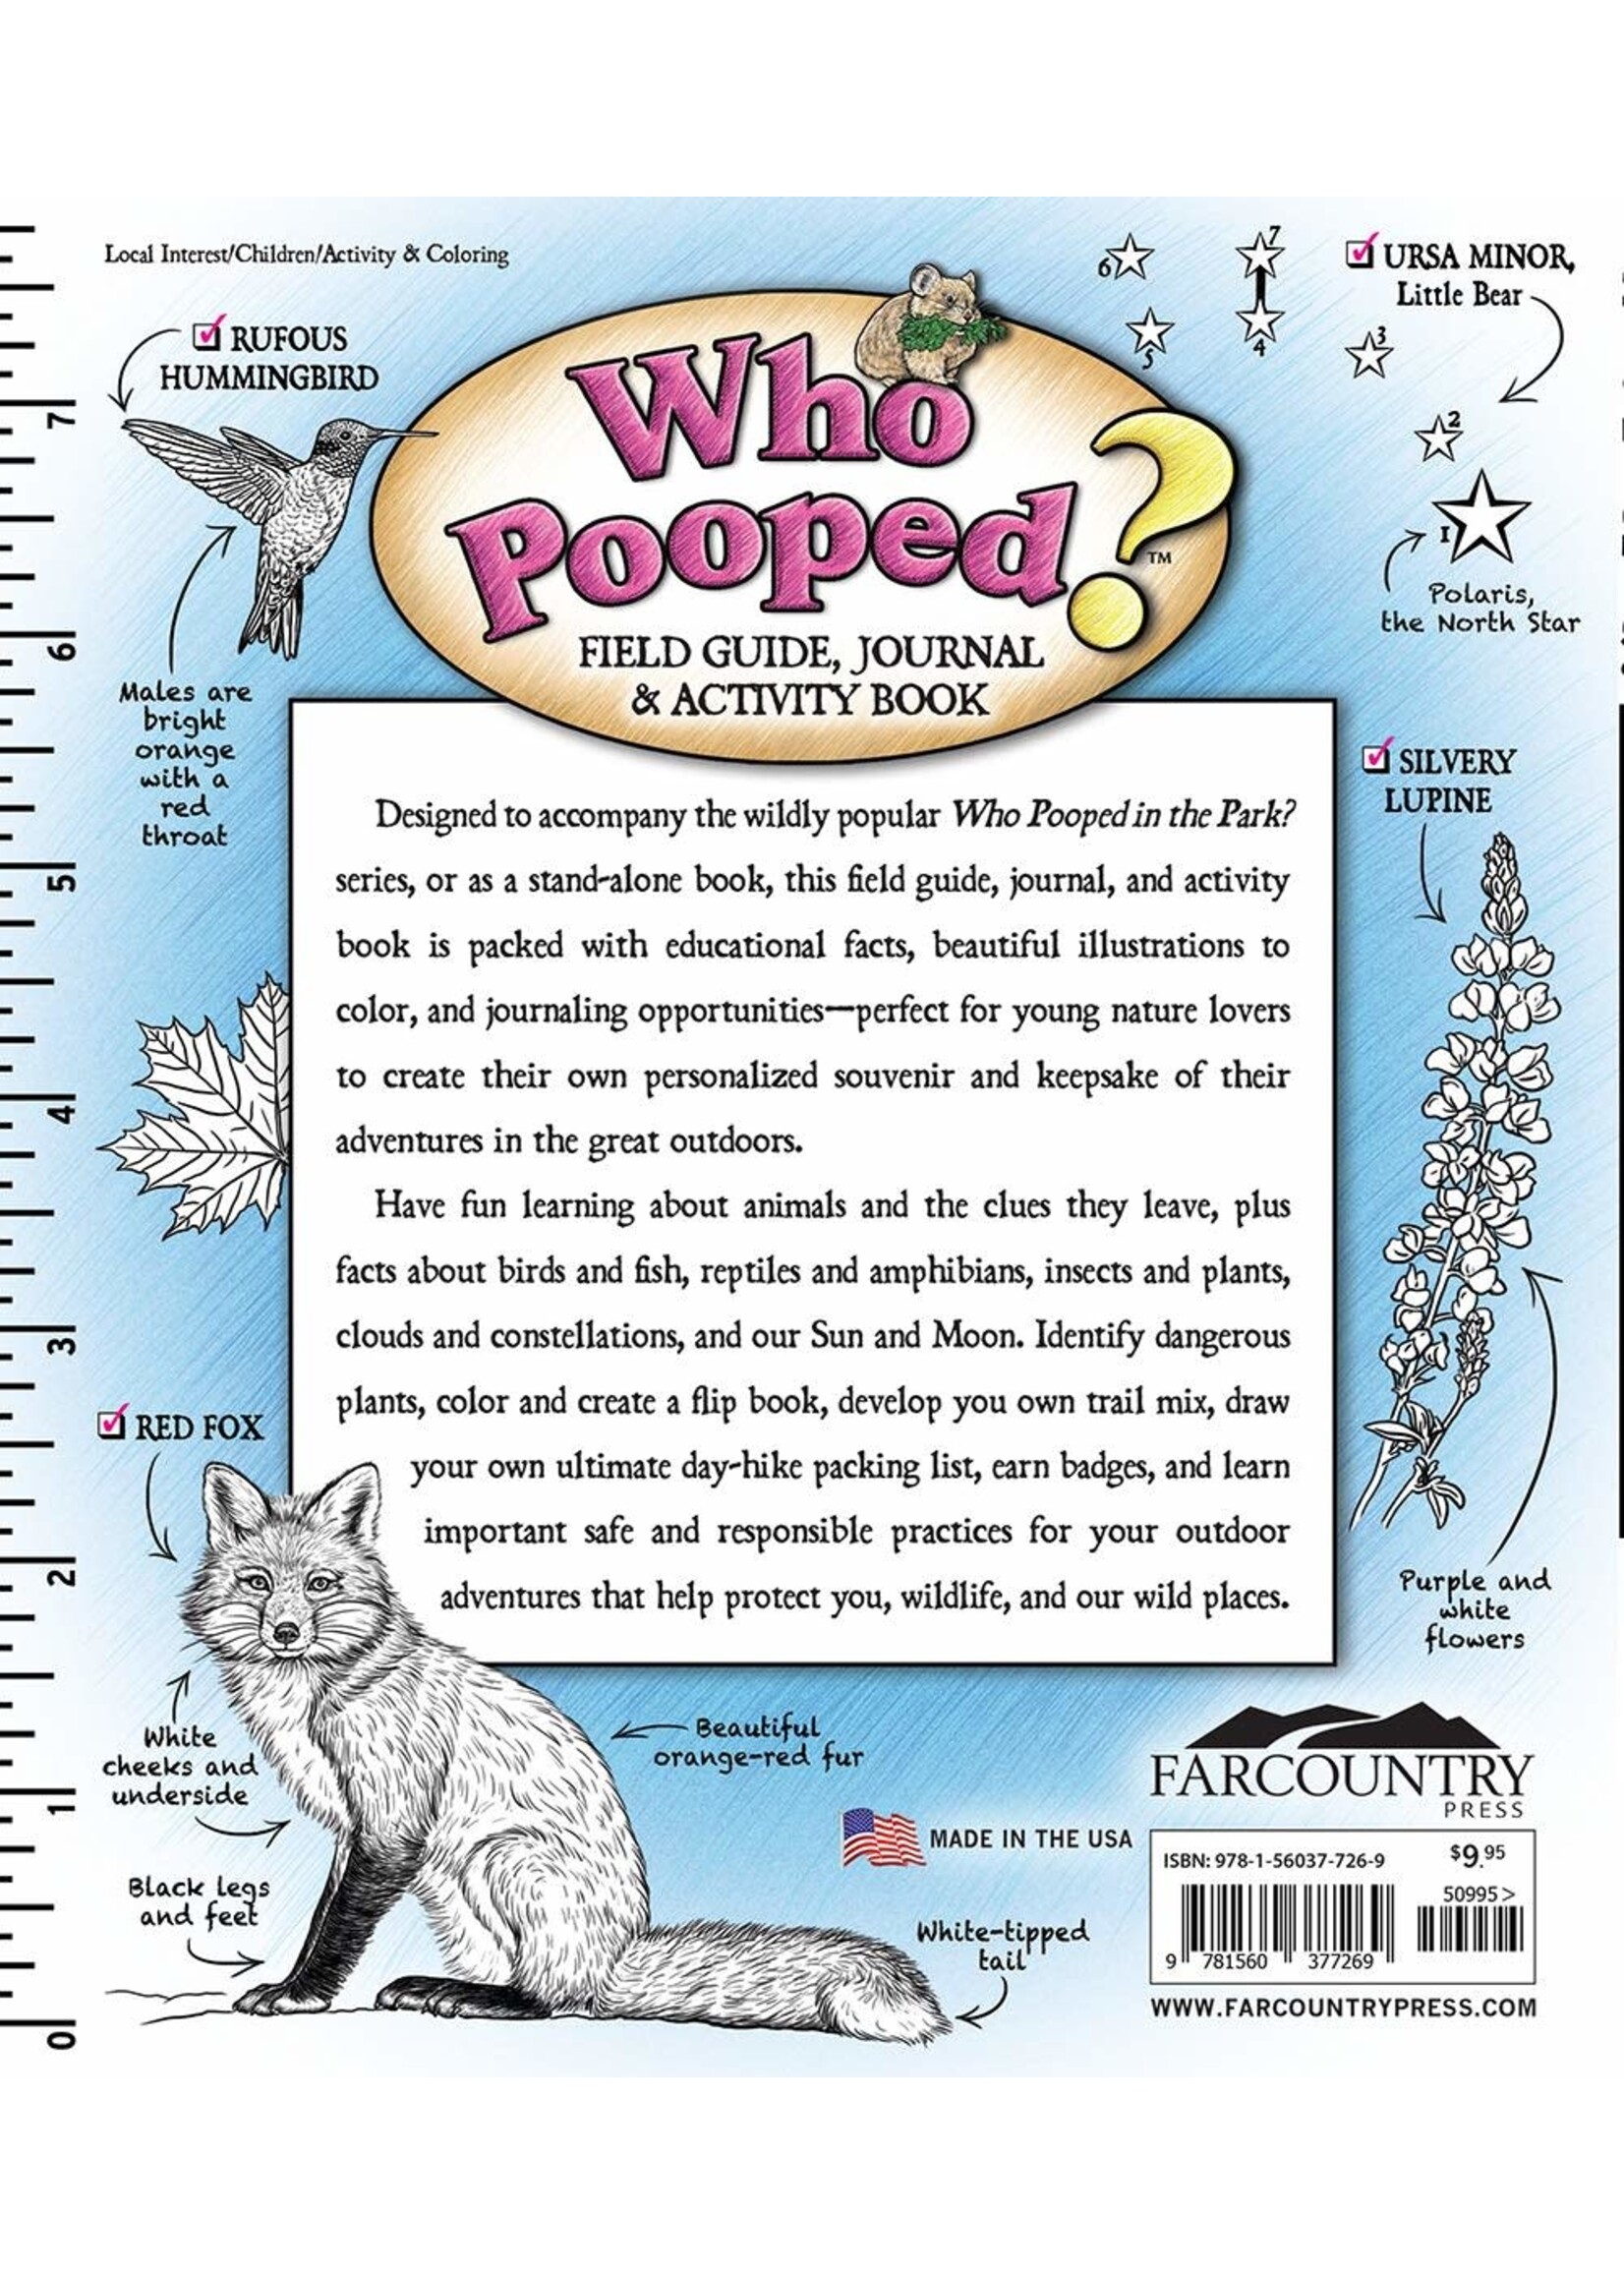 Who Pooped? Field Guide Journal & Activity Book